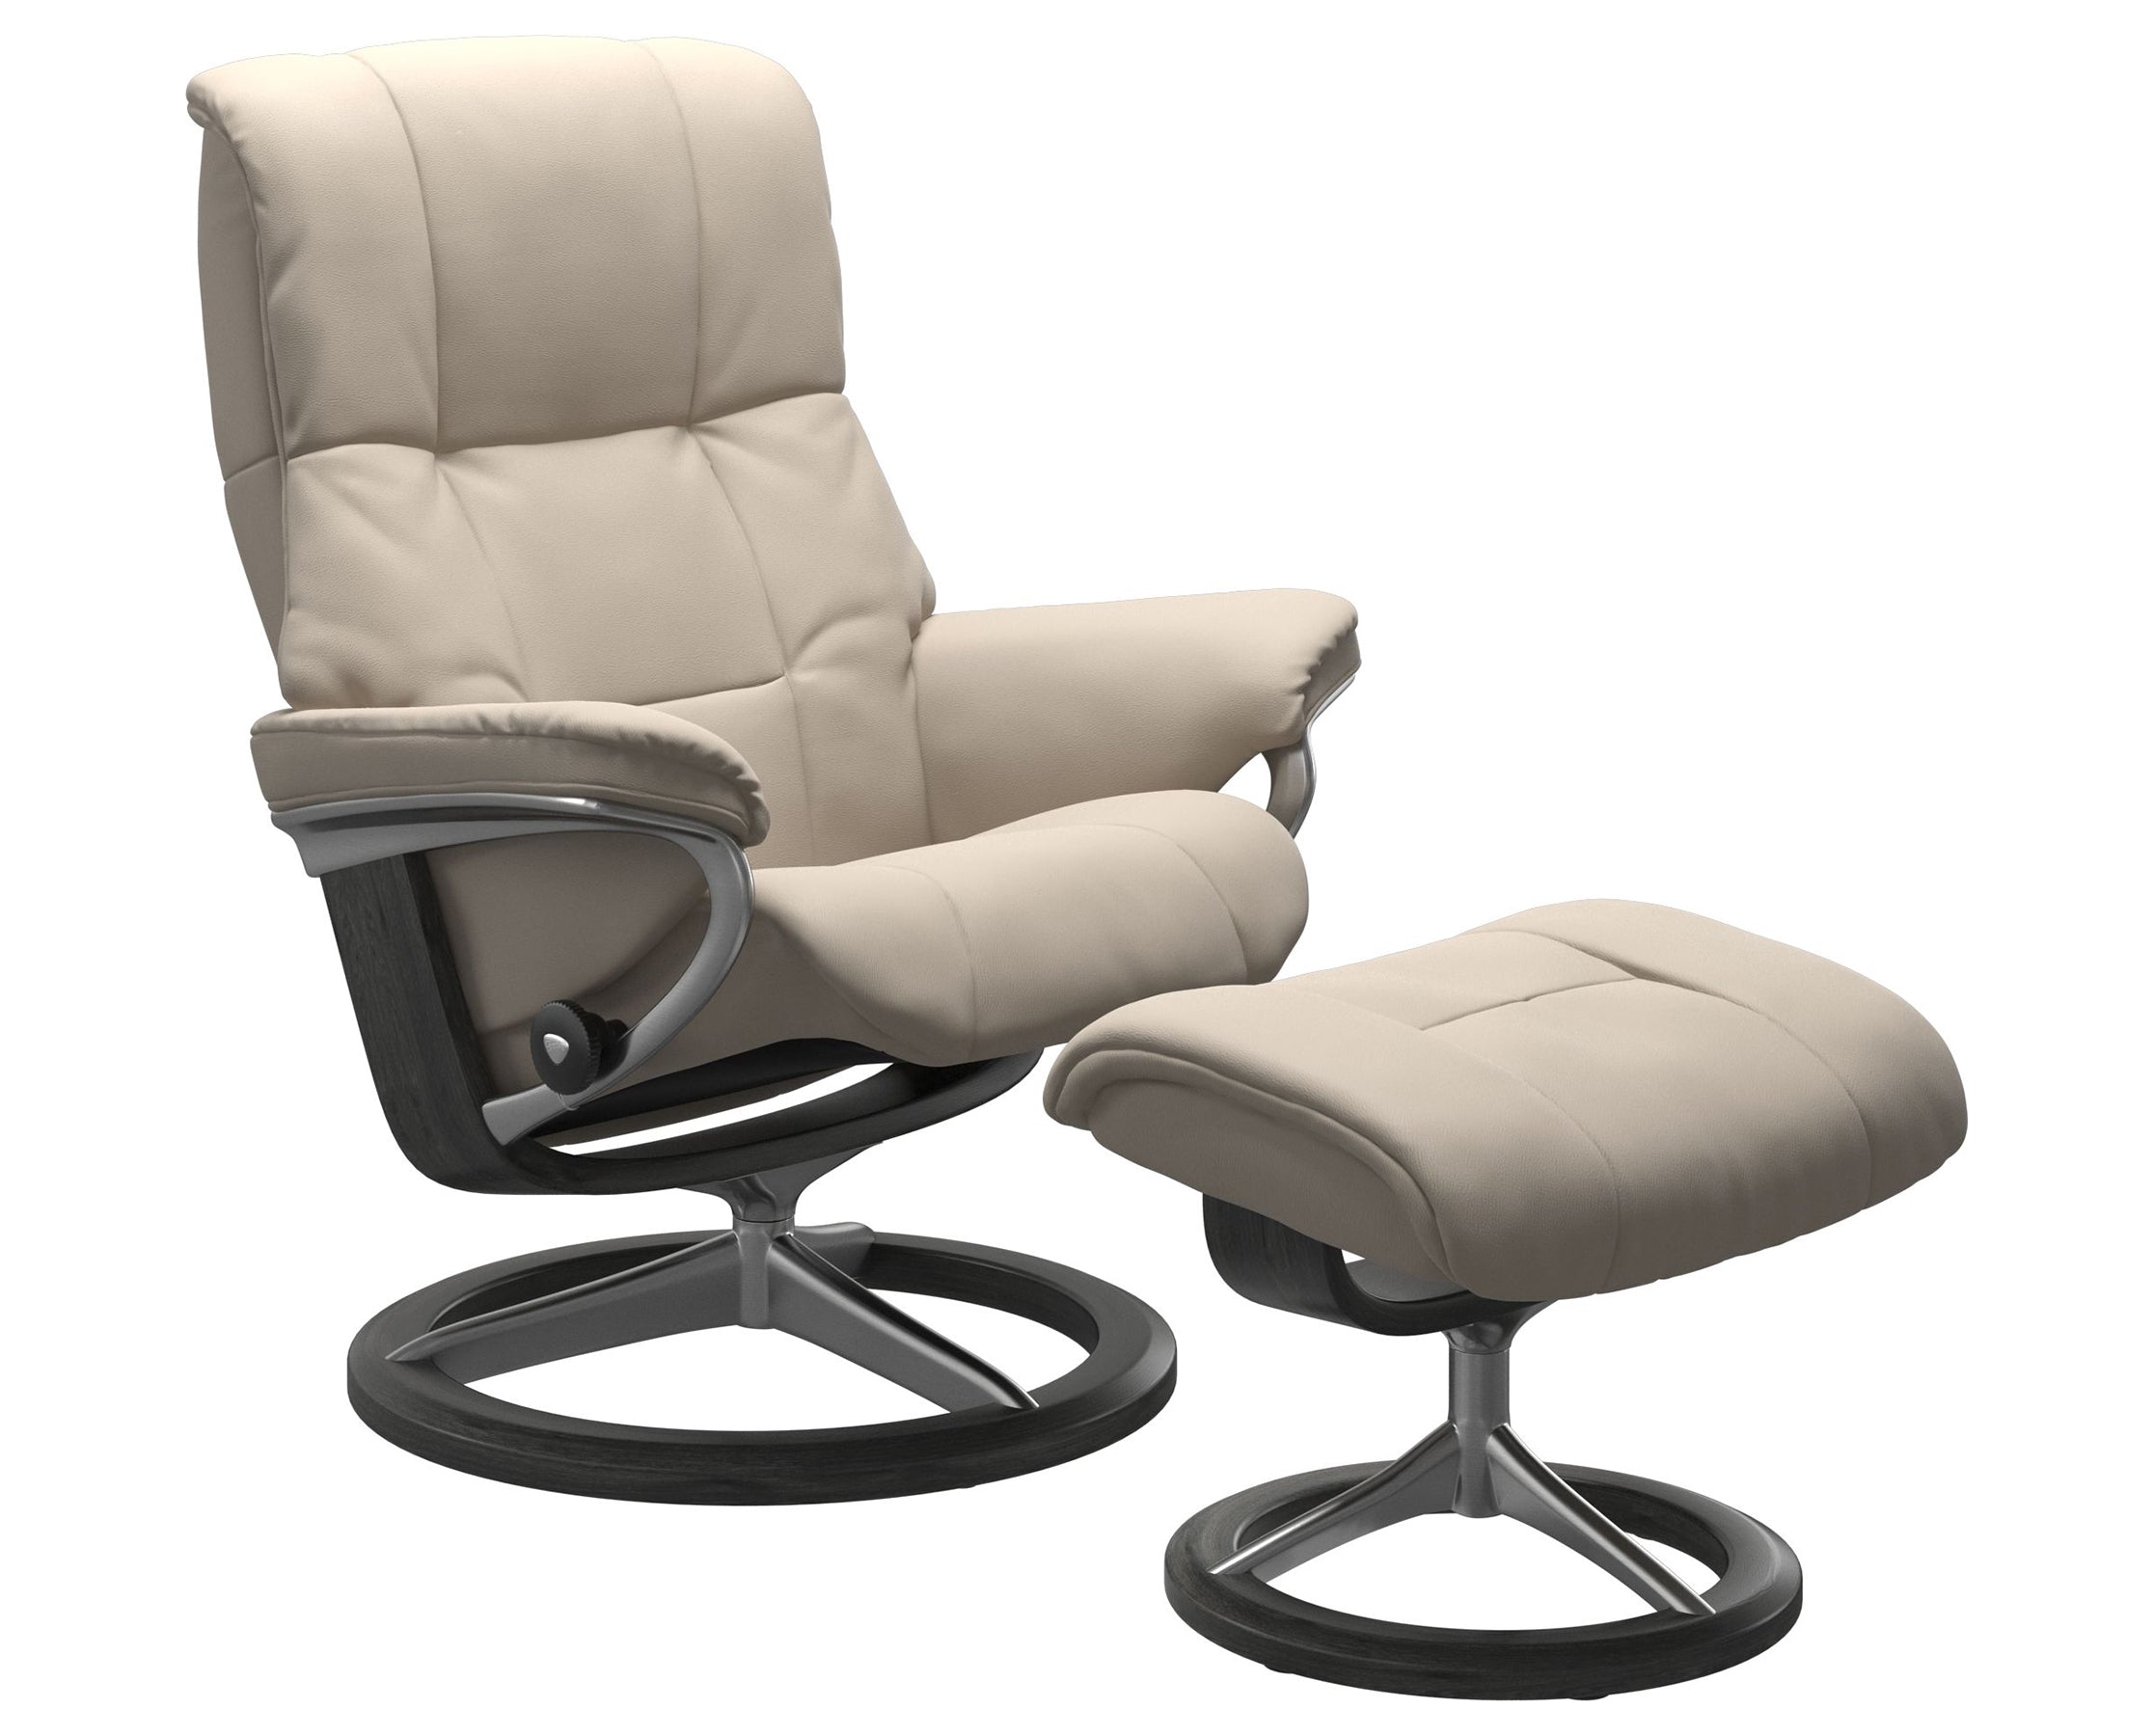 Paloma Leather Fog S/M/L and Grey Base | Stressless Mayfair Signature Recliner | Valley Ridge Furniture